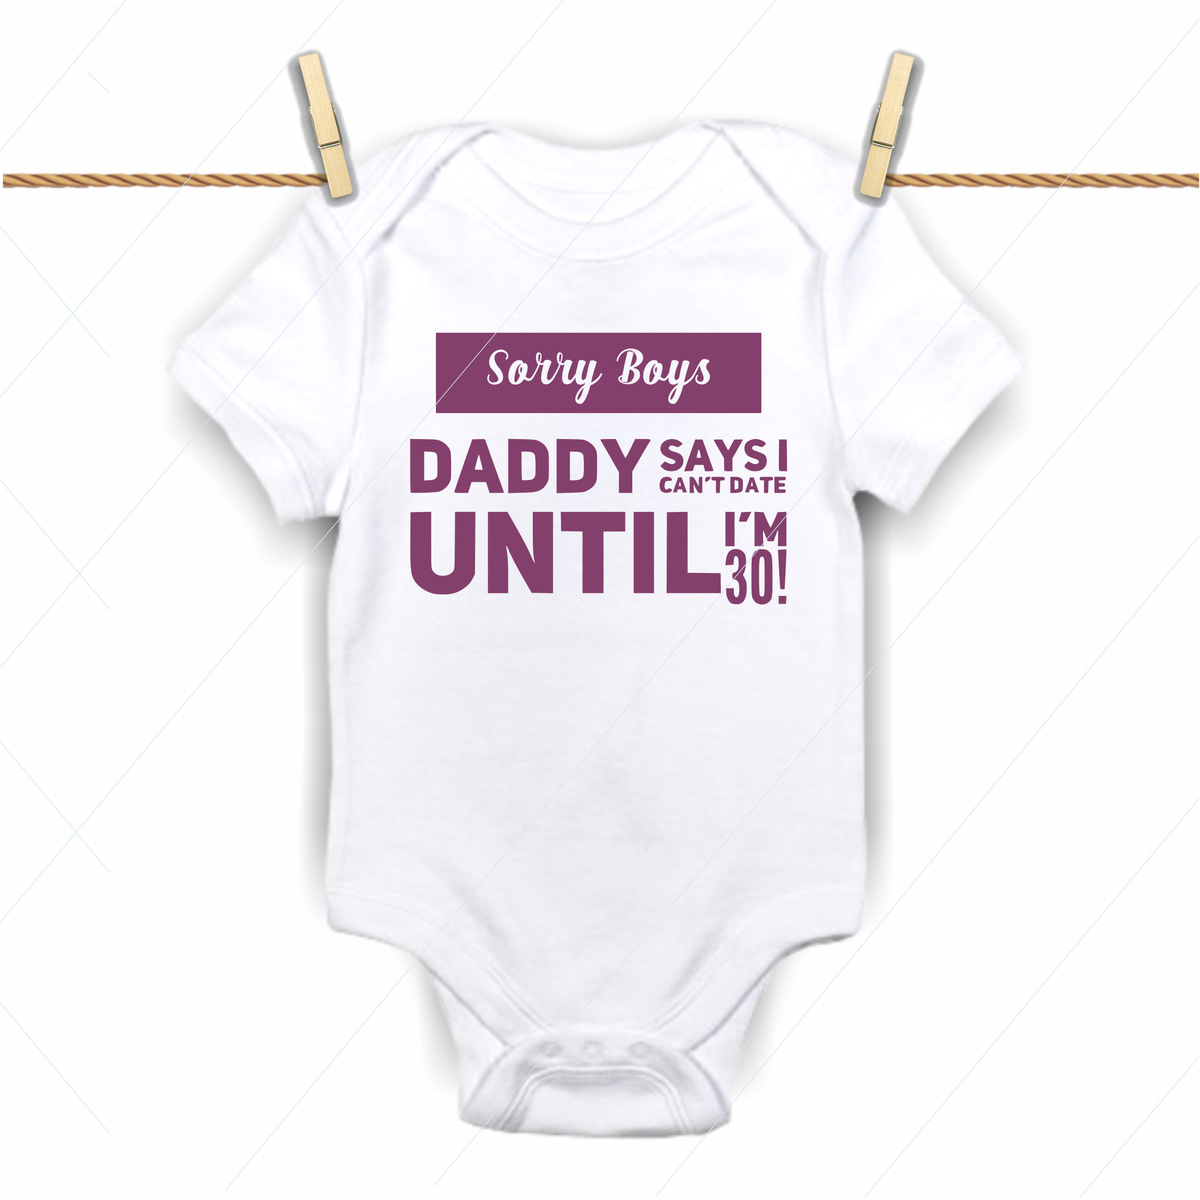 Download Sorry Boys, Daddy Says I cant date until I'm 30 - SVG - DESIGNS NOOK